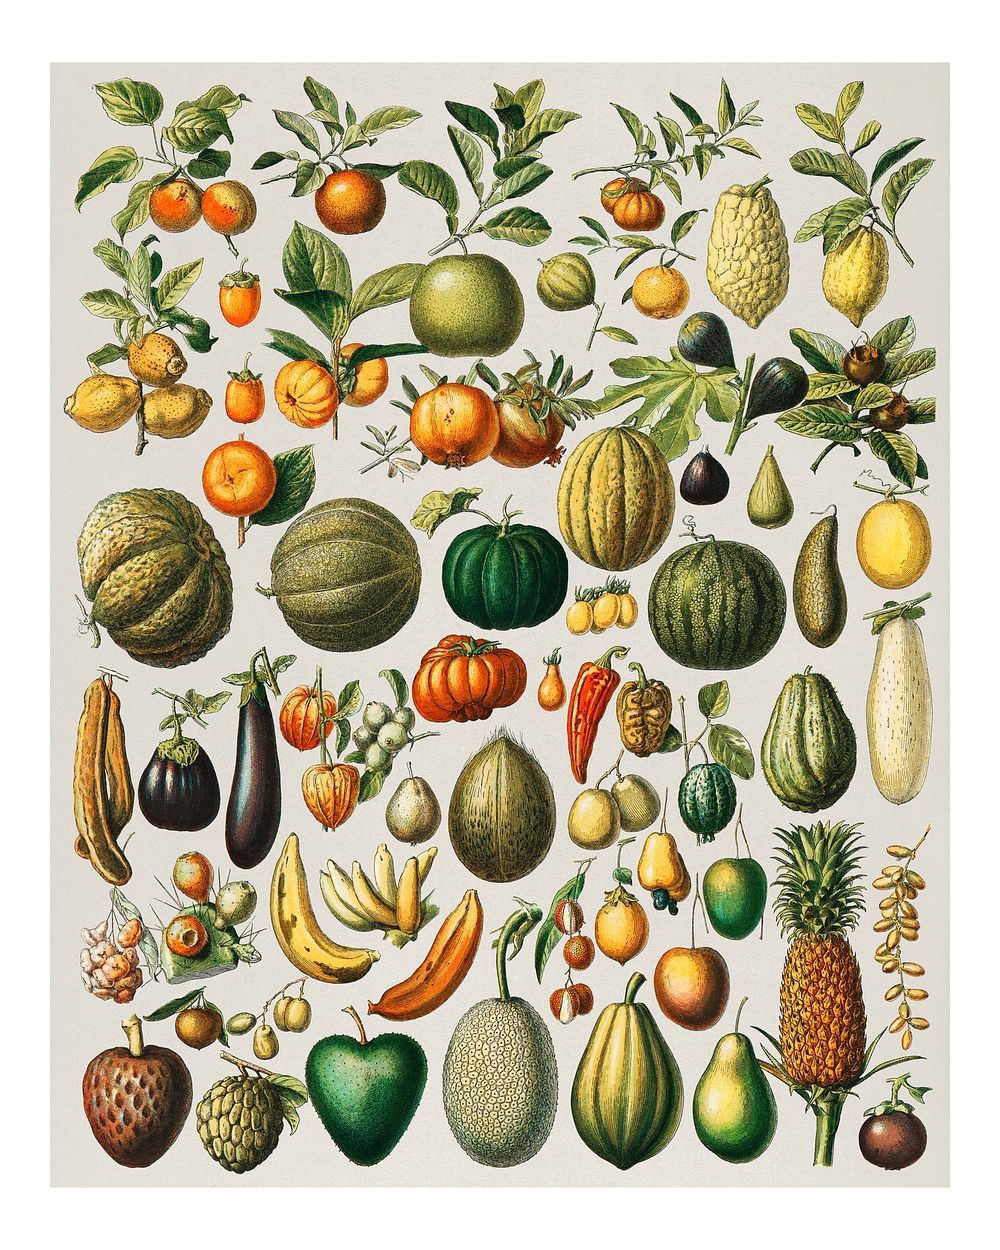 Vintage fruits and vegetables illustration wall art print and poster.